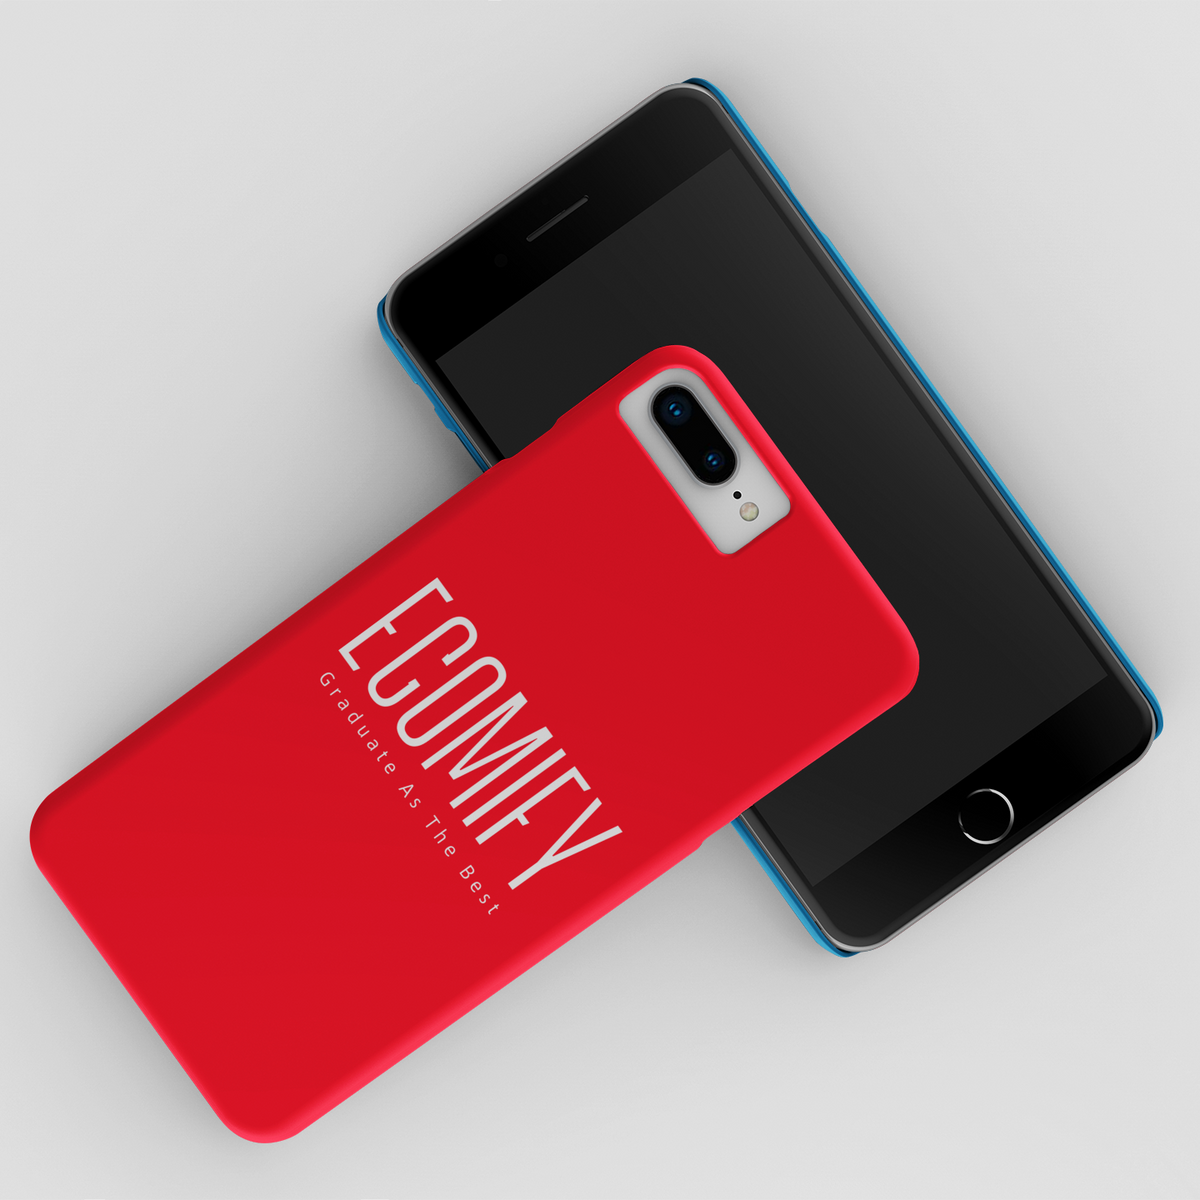 Ecomify™ Iphone Case